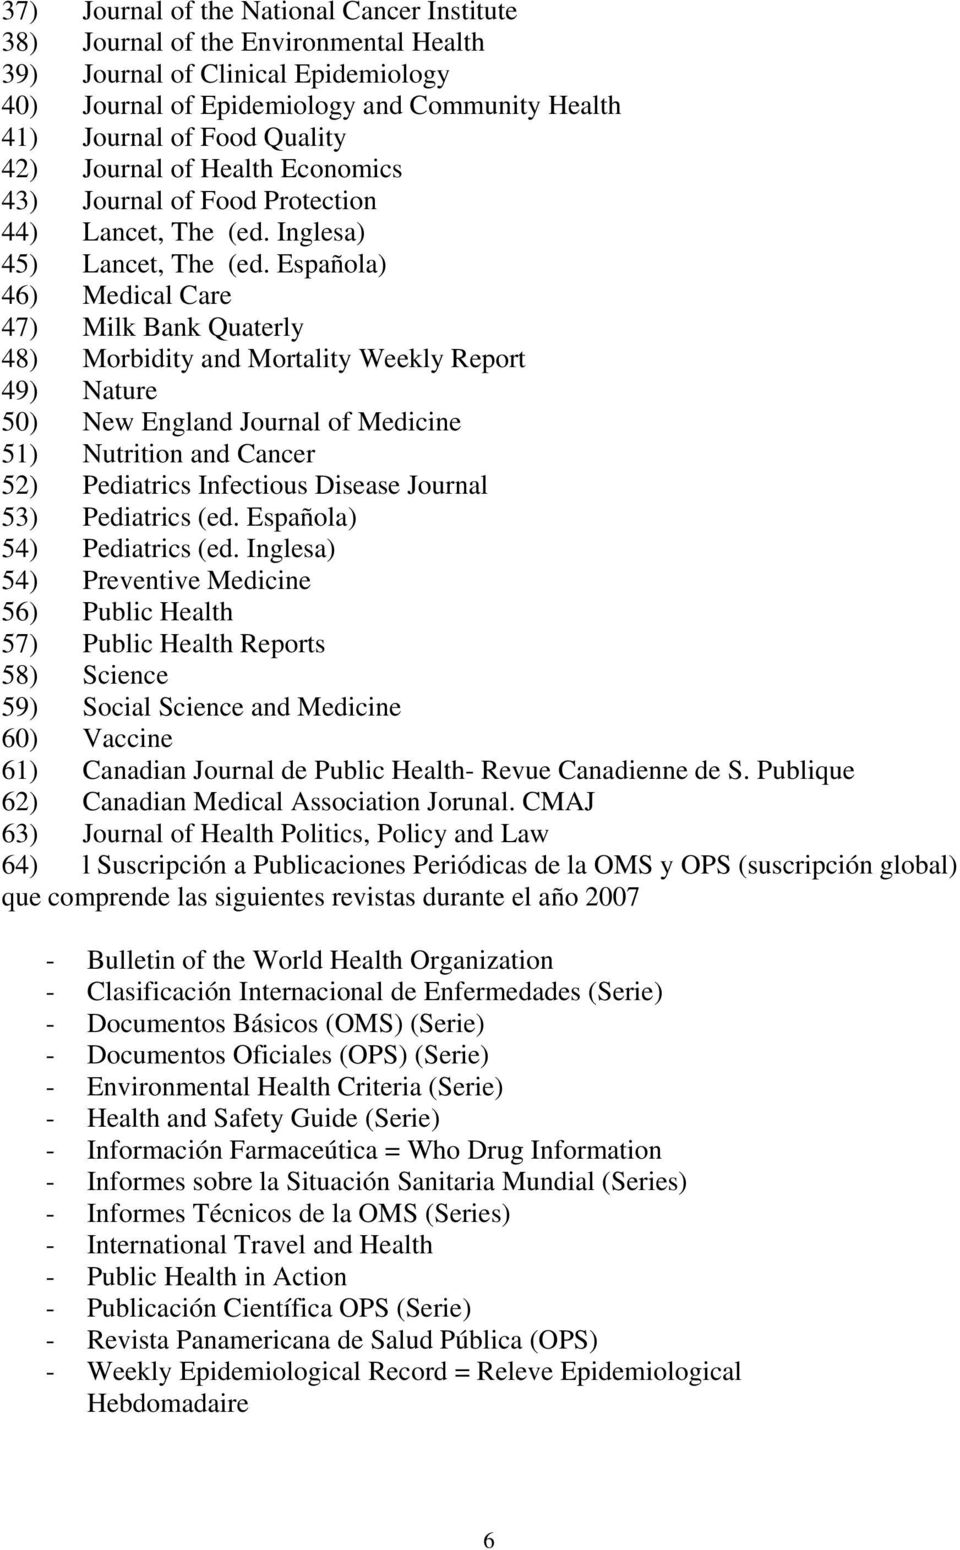 Española) 46) Medical Care 47) Milk Bank Quaterly 48) Morbidity and Mortality Weekly Report 49) Nature 50) New England Journal of Medicine 51) Nutrition and Cancer 52) Pediatrics Infectious Disease